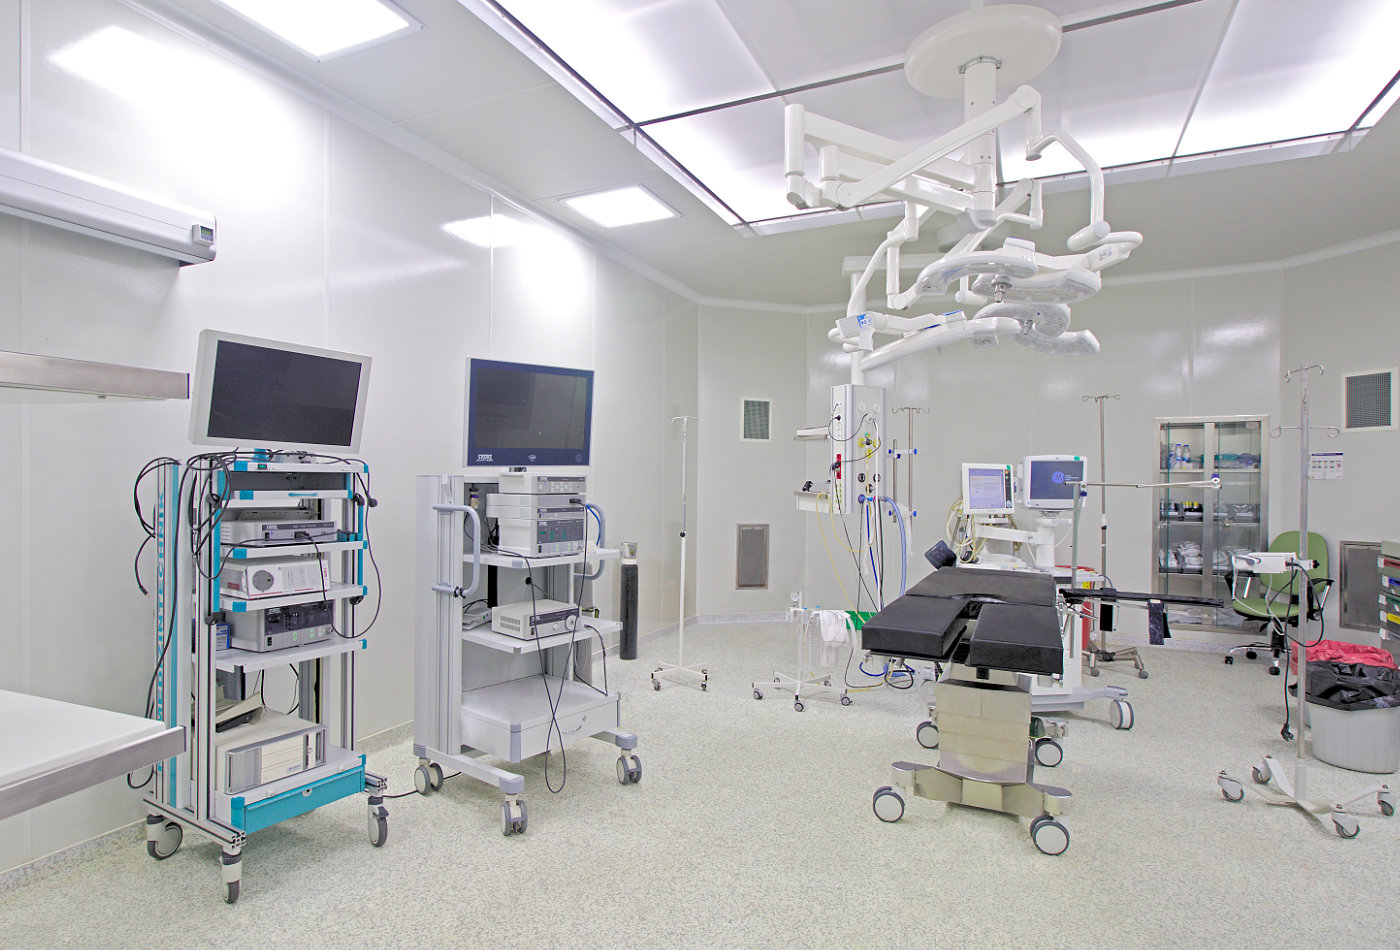 University hospital operating rooms GRP hygienic walls, dropped ceilings